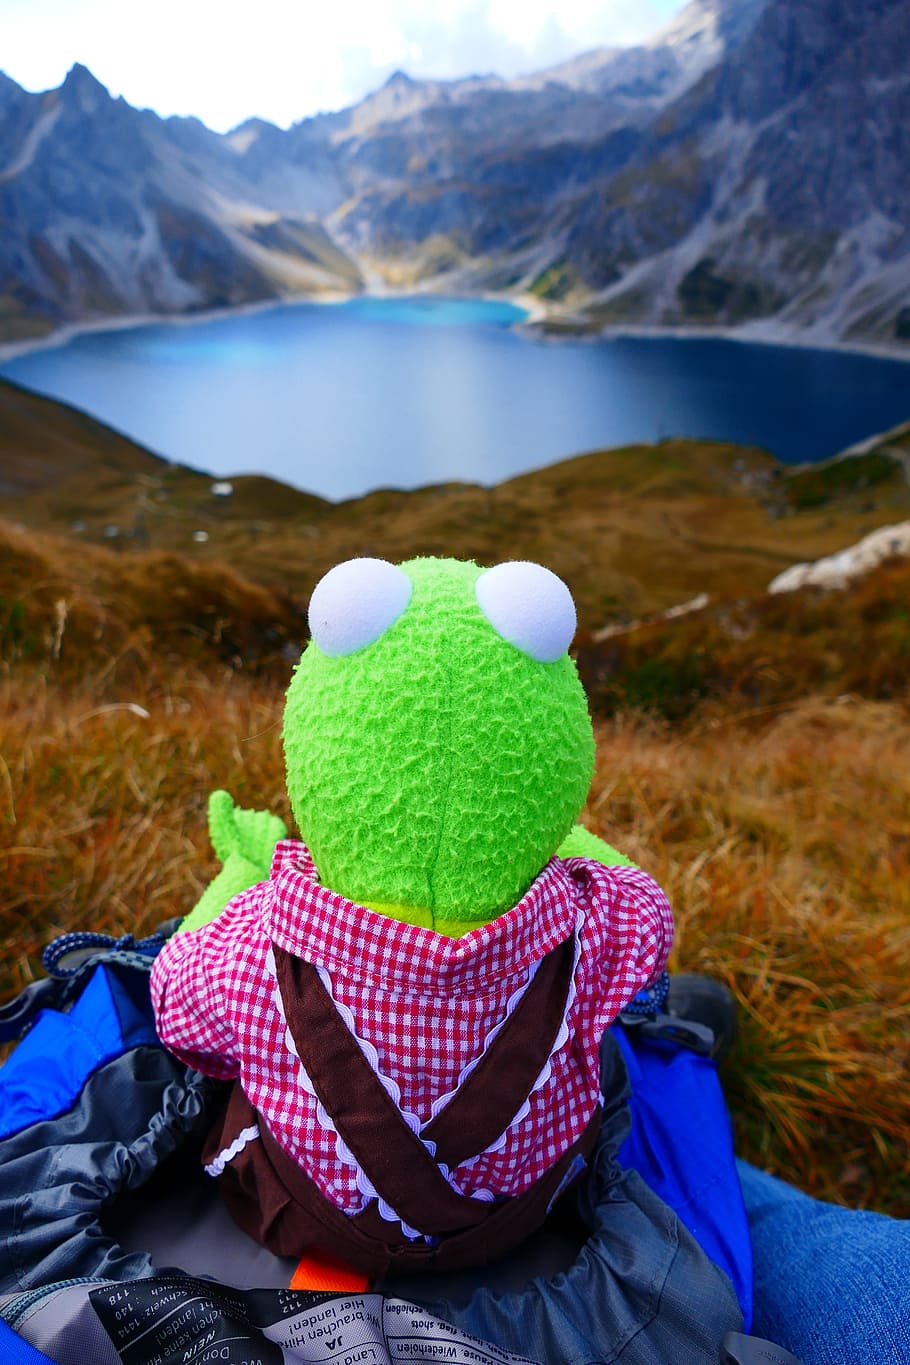 A stuffed Kermit frog sitting on a backpack - Kermit the Frog